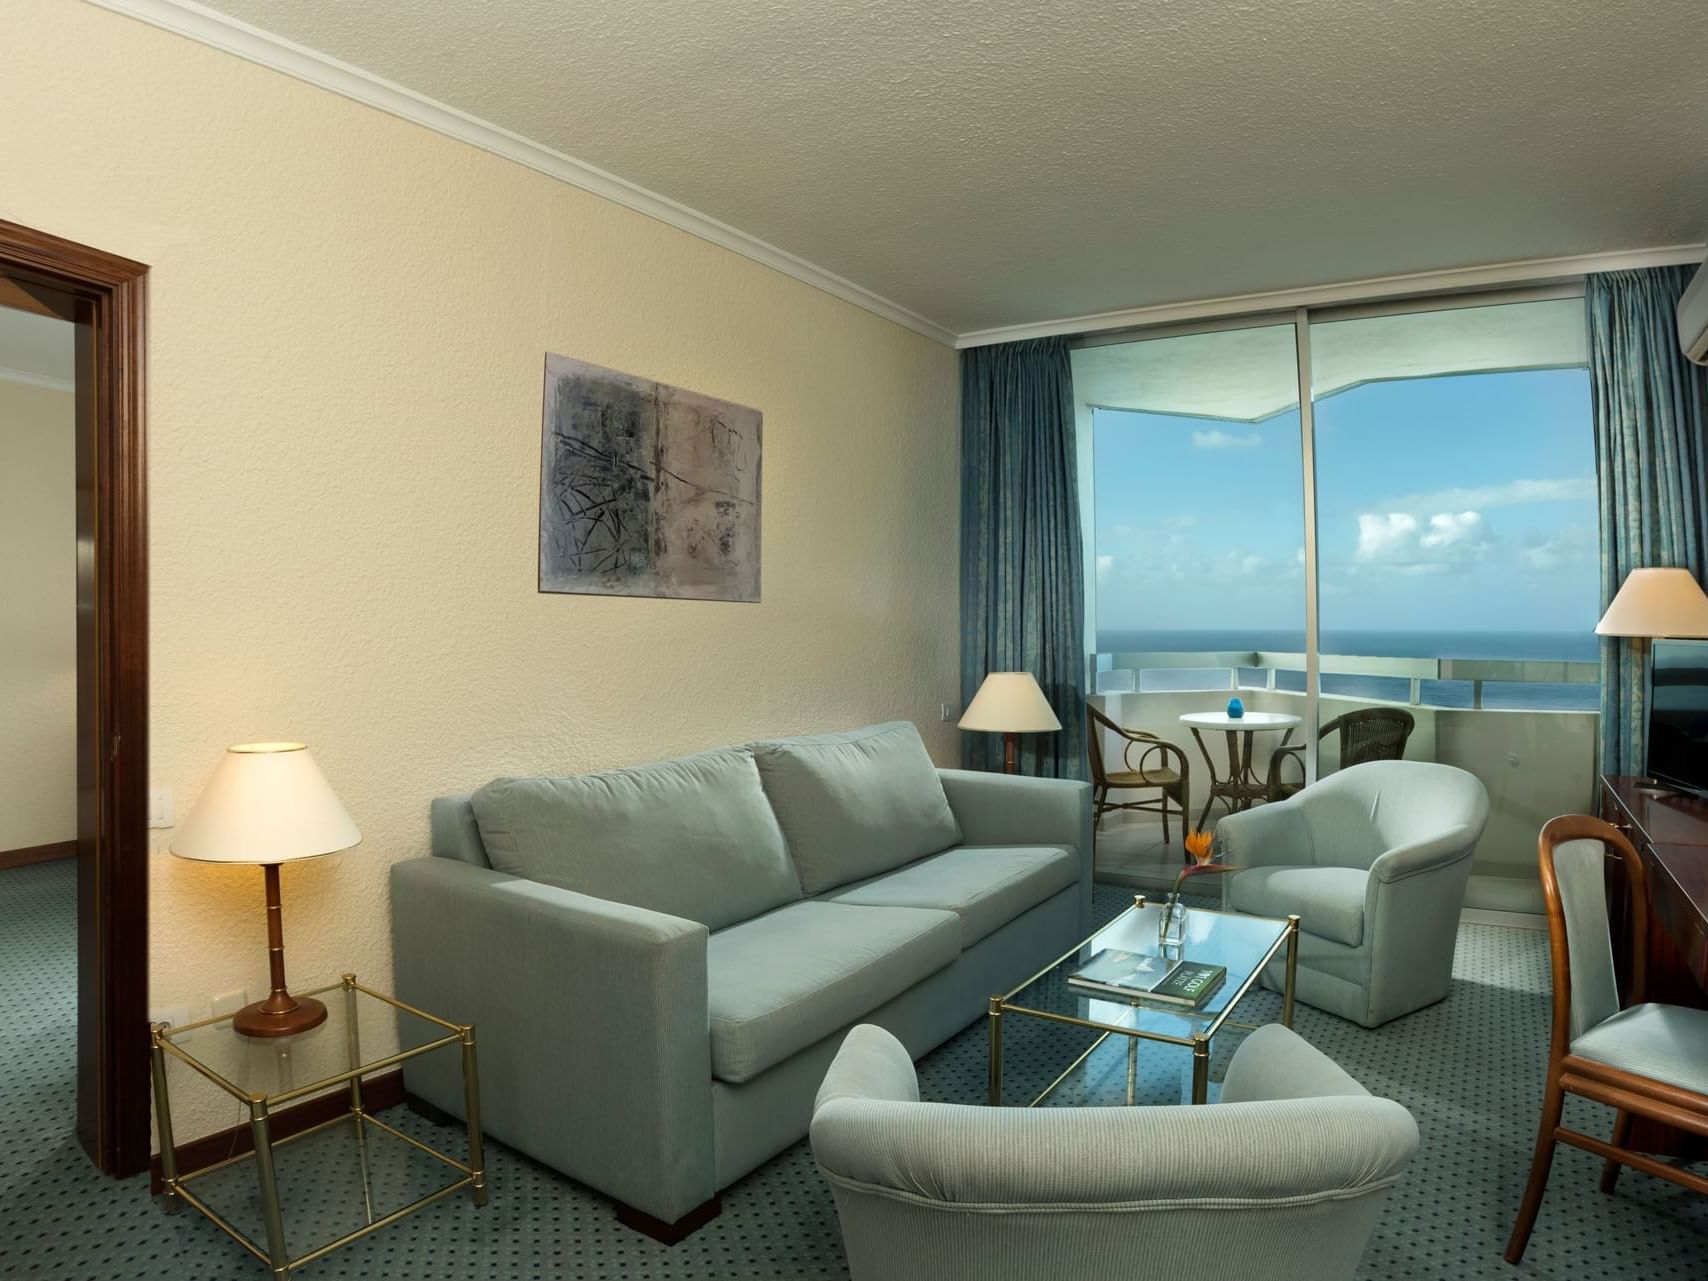 Suite with sea view at Precise Resort Tenerife